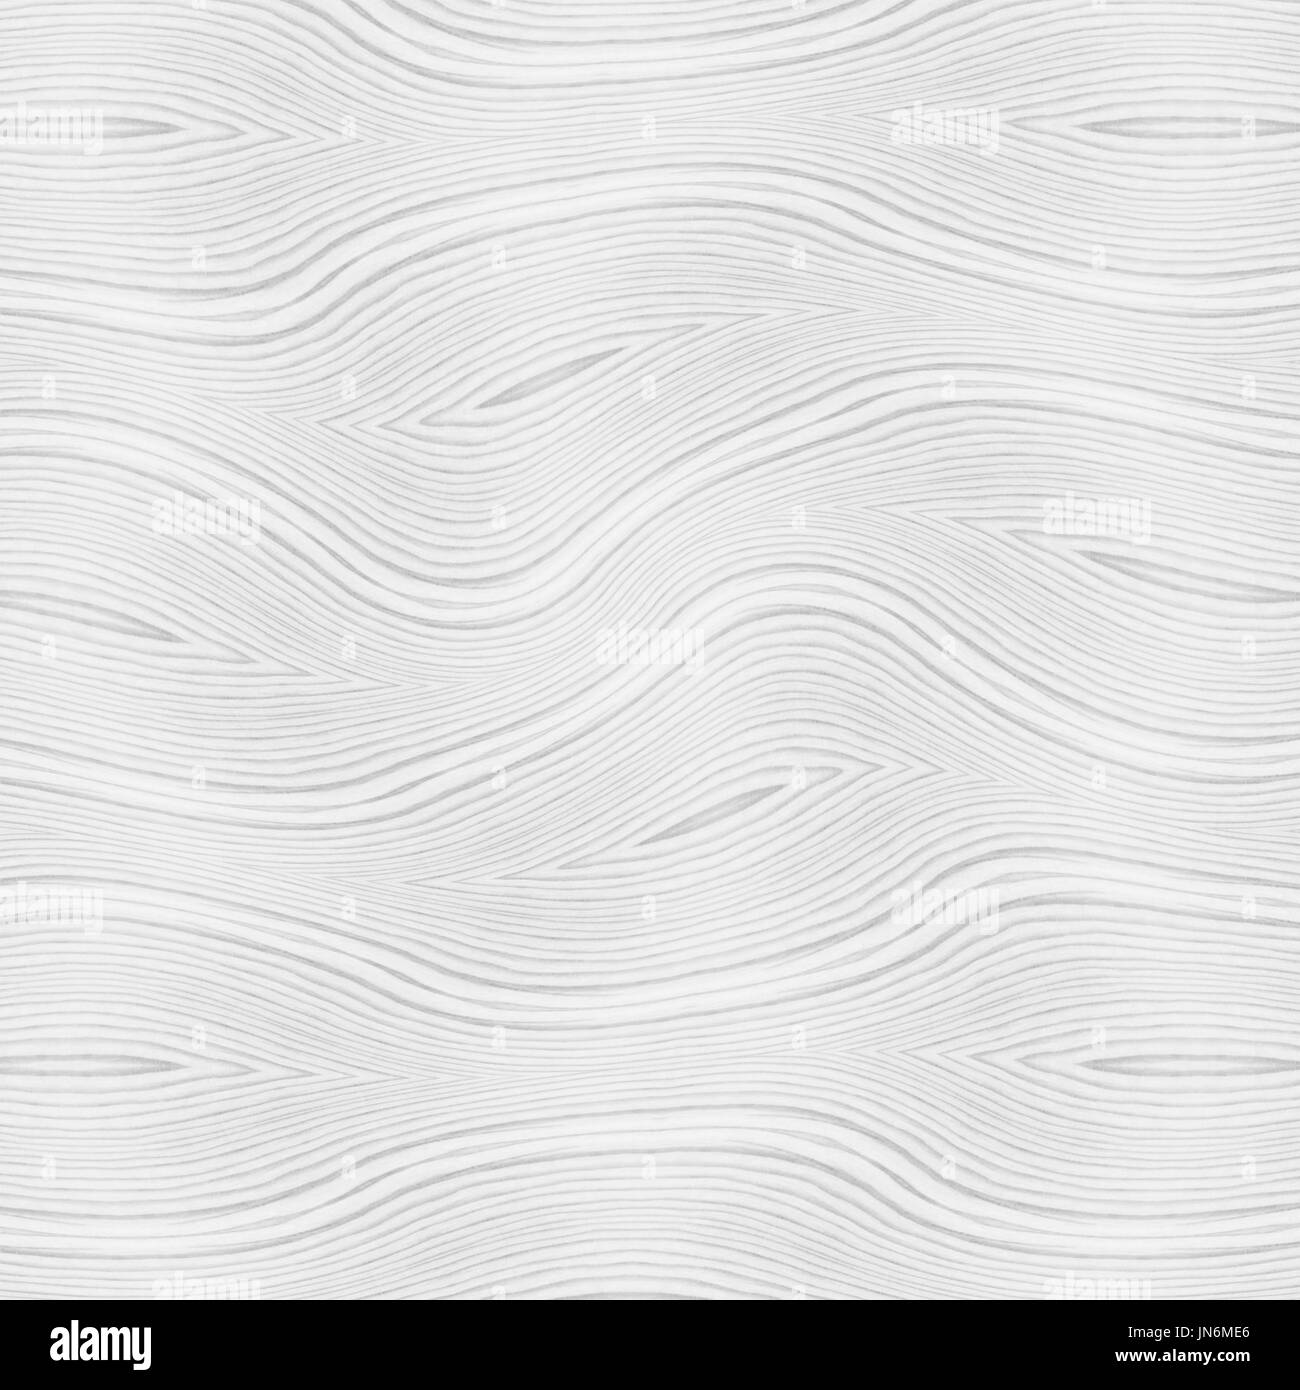 Abstract white wood texture background Stock Photo